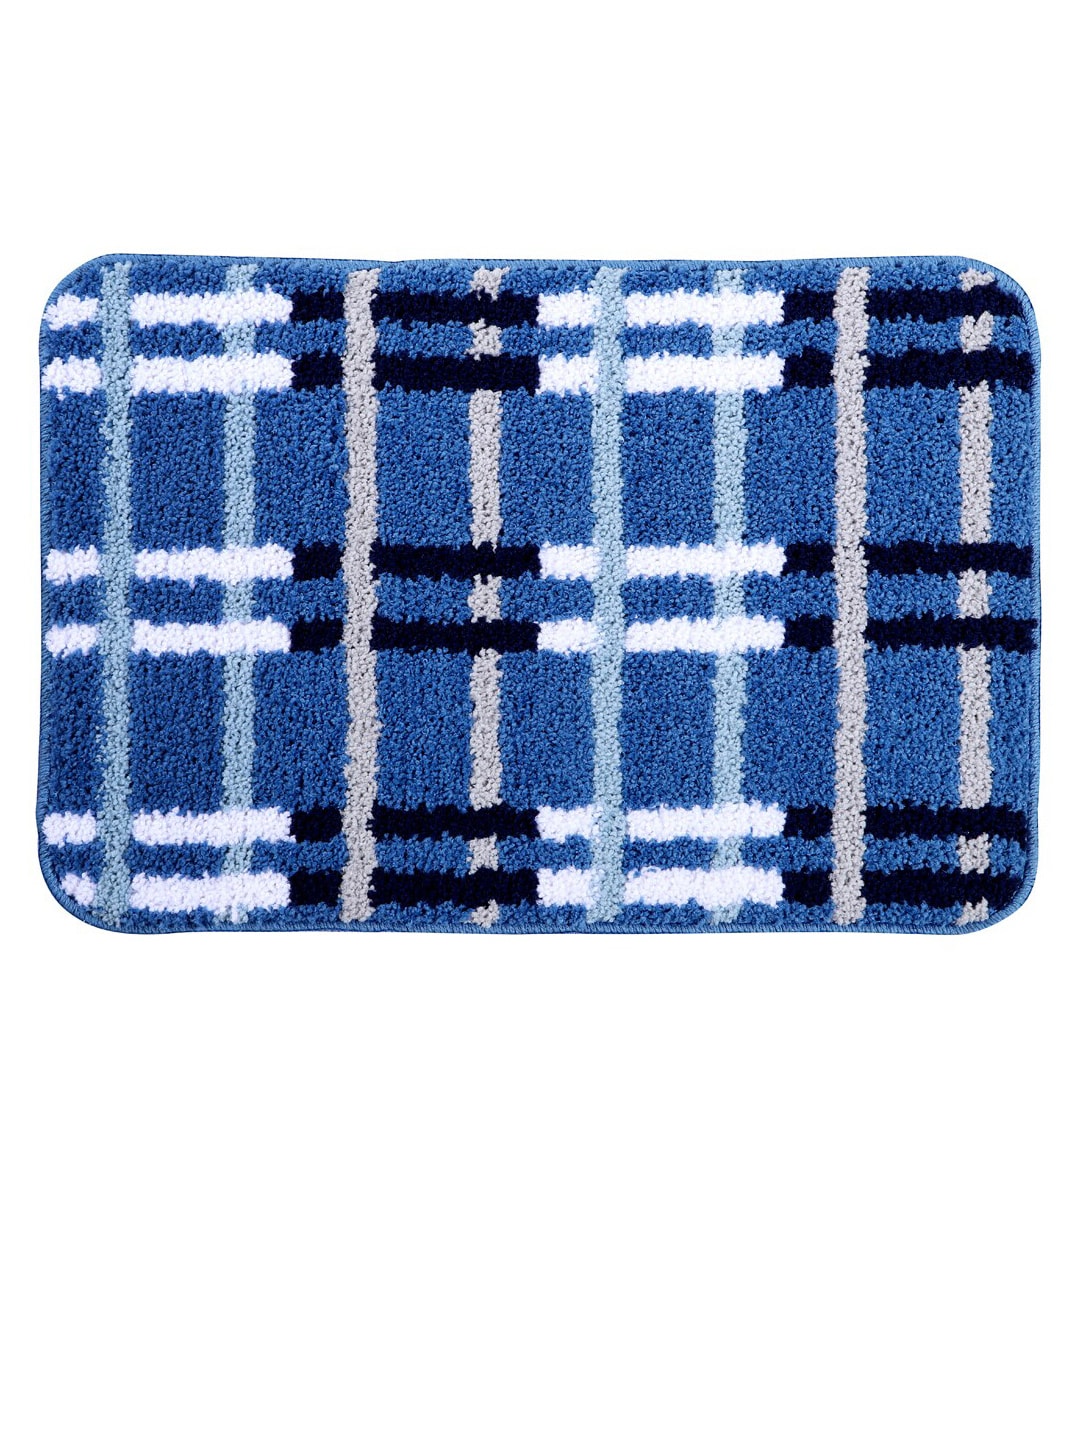 Pano Blue & Black Checked Micro Polyester Bath Rugs Price in India